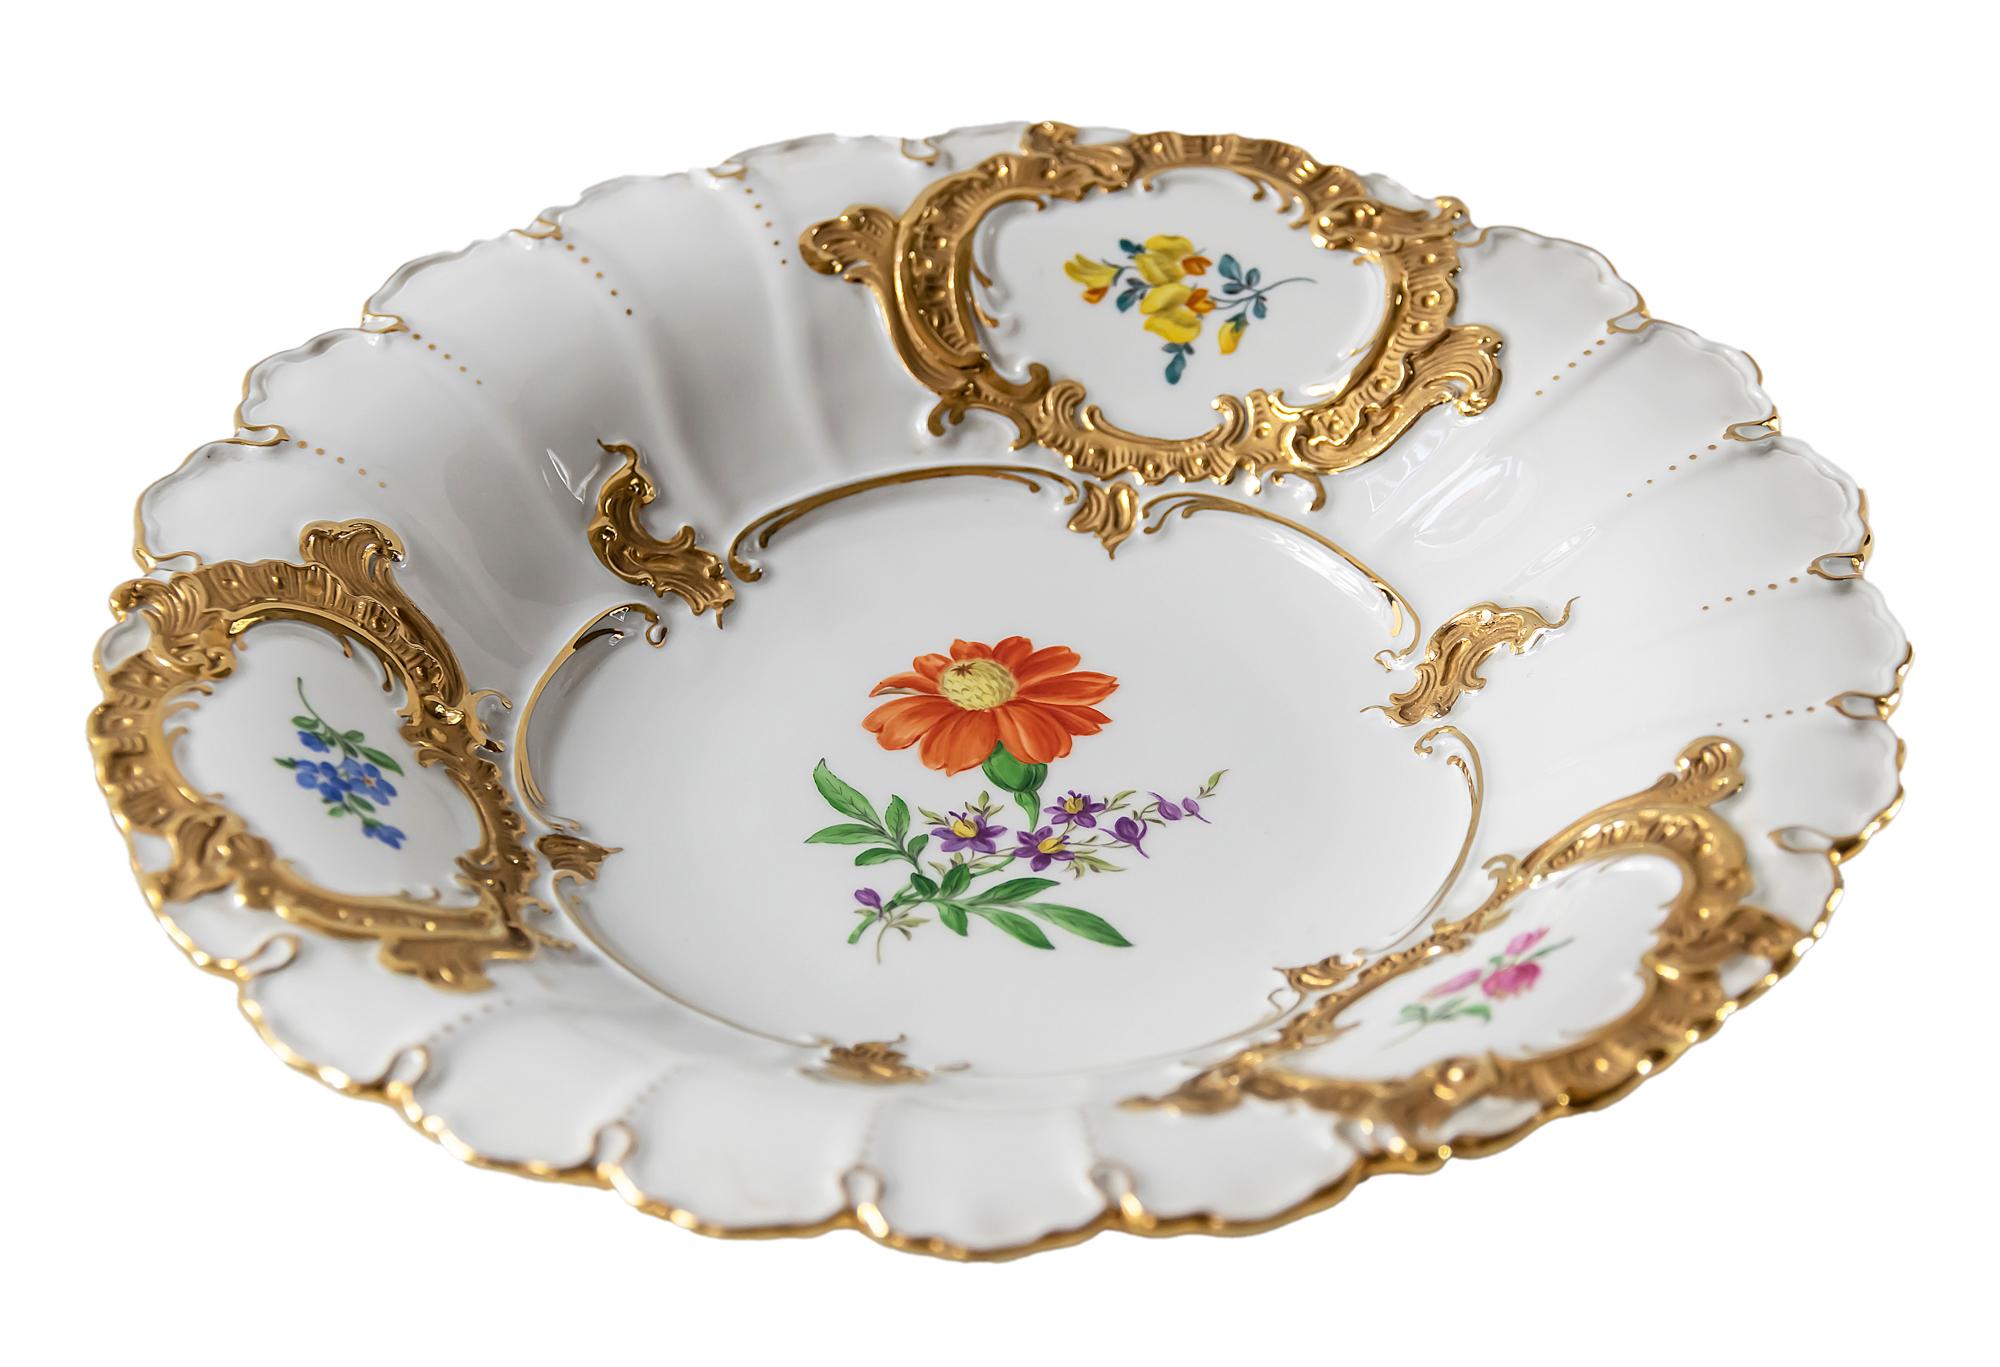 Large deep Meissen Porcelain plate with hand painted floral motives and gold decor.